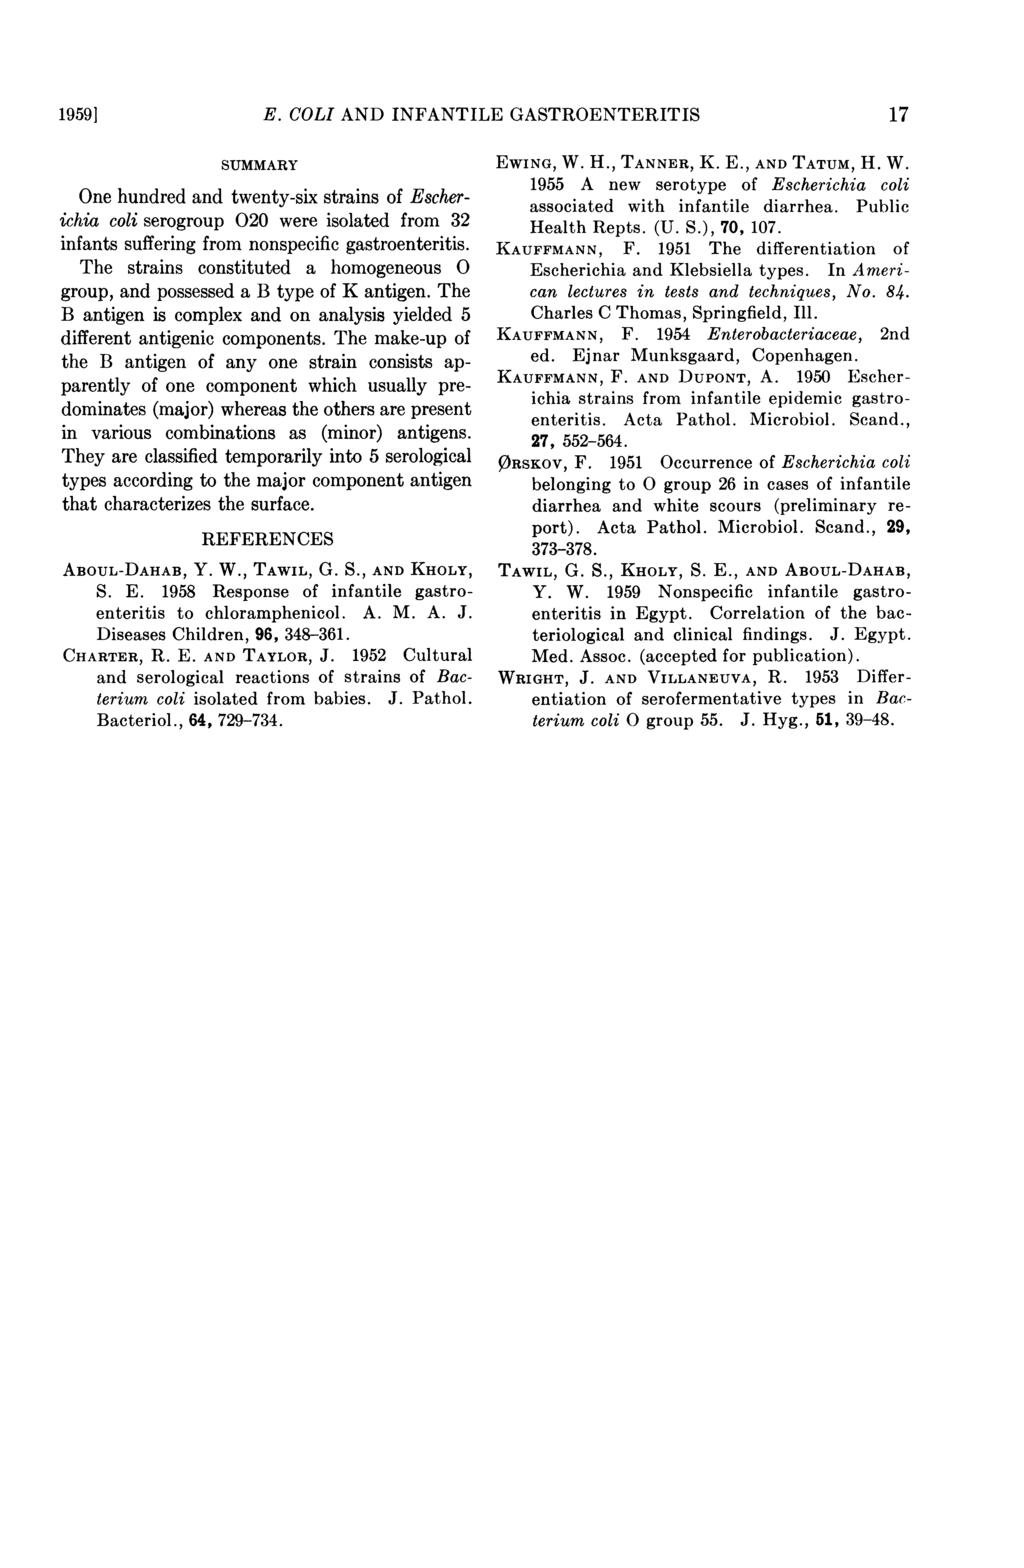 1959] E. COLI AND INFANTILE GASTROENTERITIS 17 SUMMARY One hundred and twenty-six strains of Escherichia coli serogroup 020 were isolated from 32 infants suffering from nonspecific gastroenteritis.